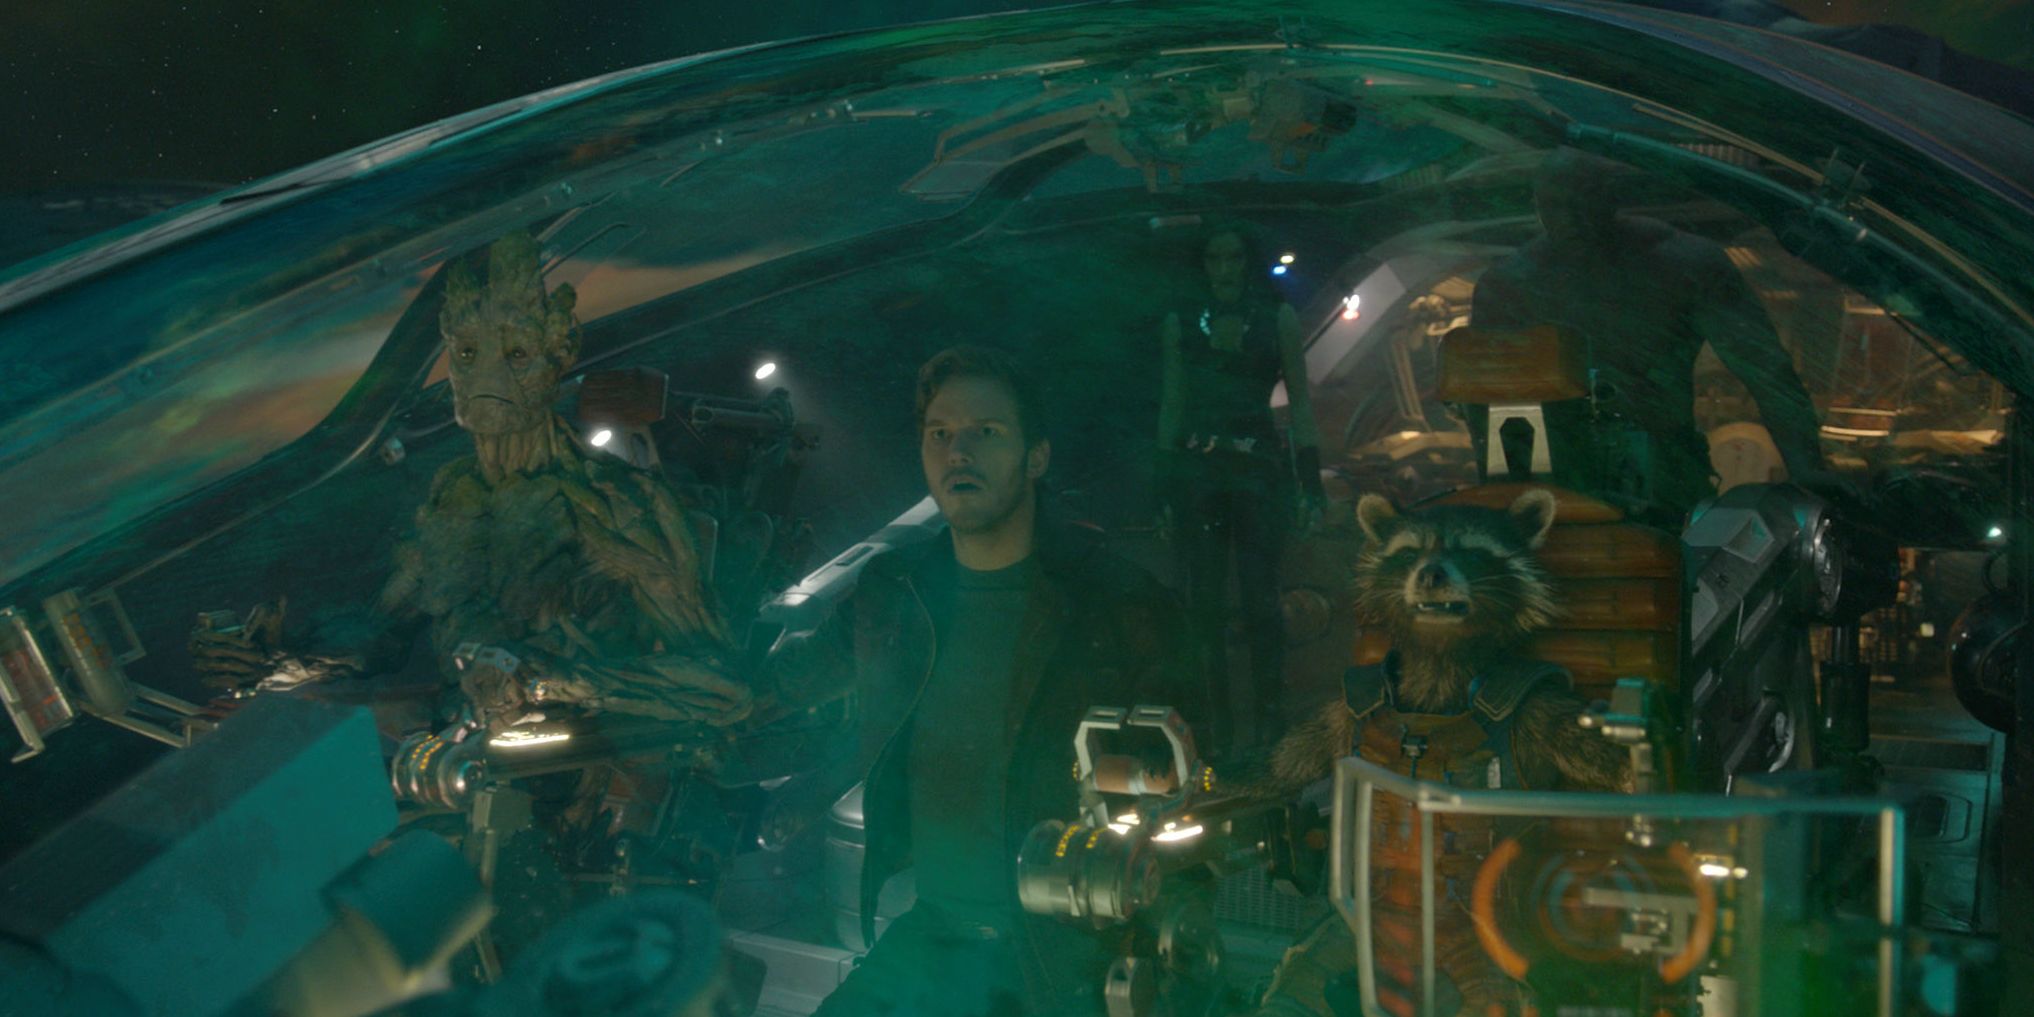 The Guardians inside the Milano in Guardians of the Galaxy Vol. 2